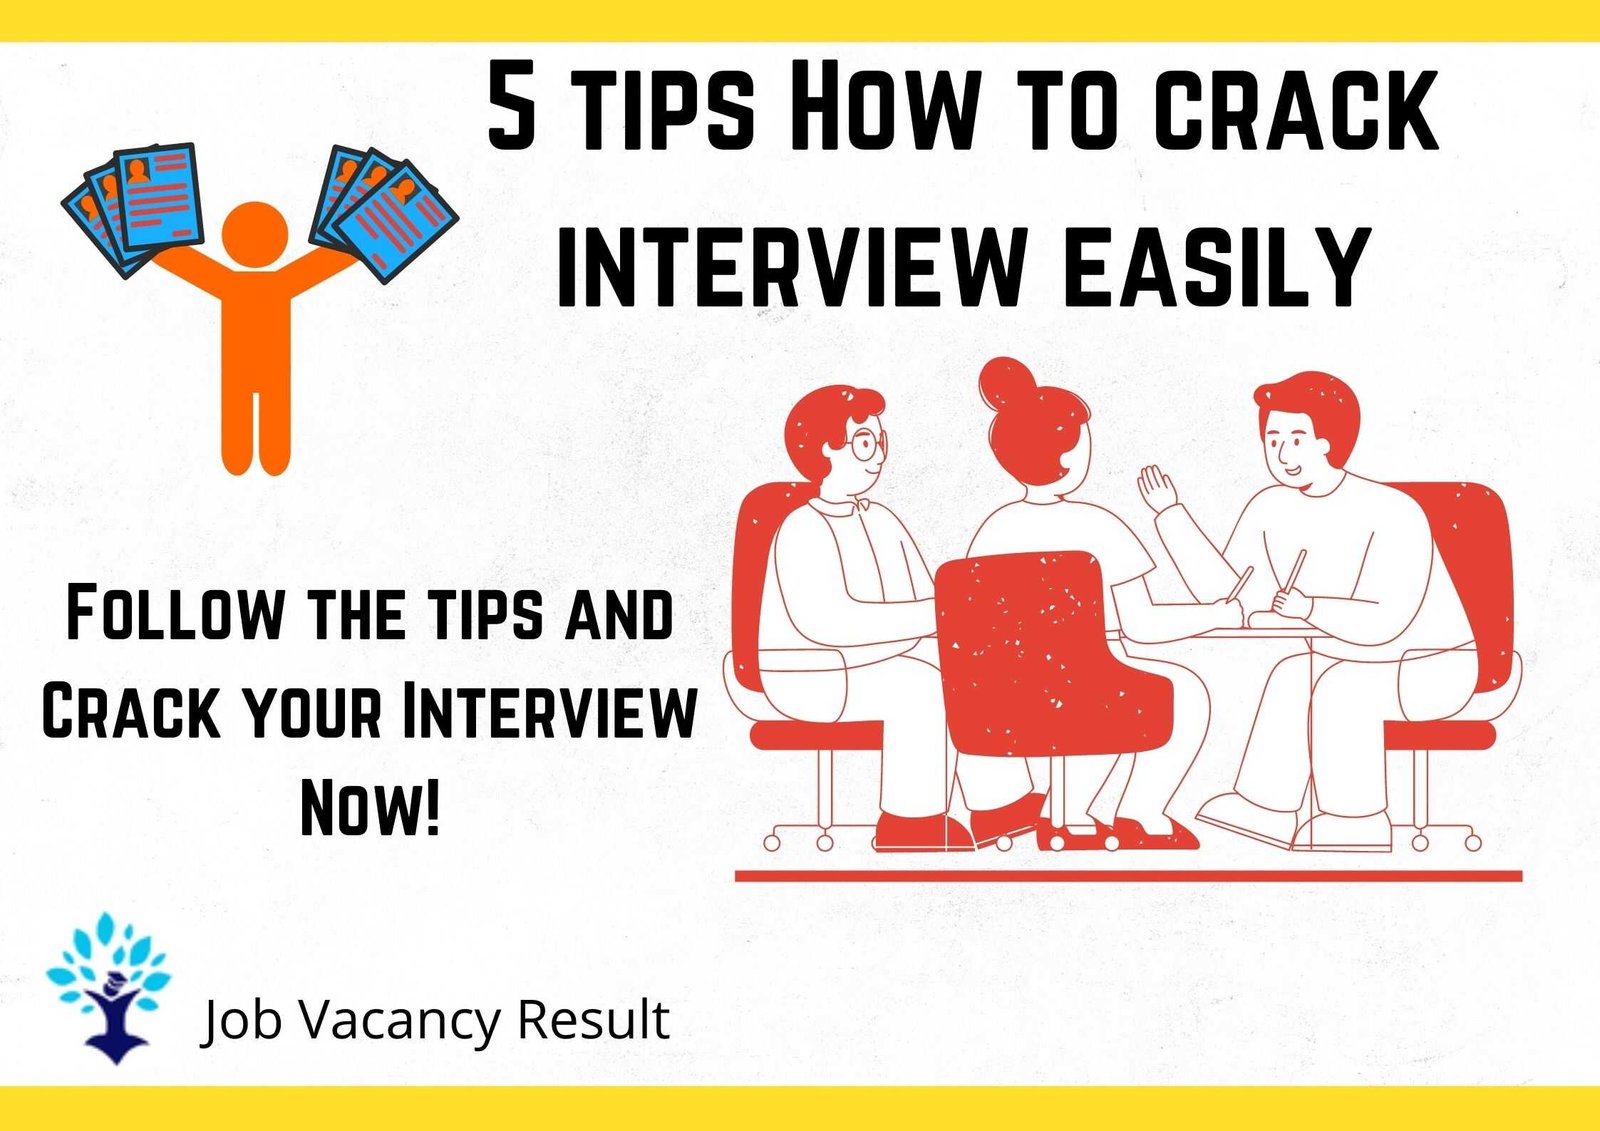 5 tips how to crack interview easily